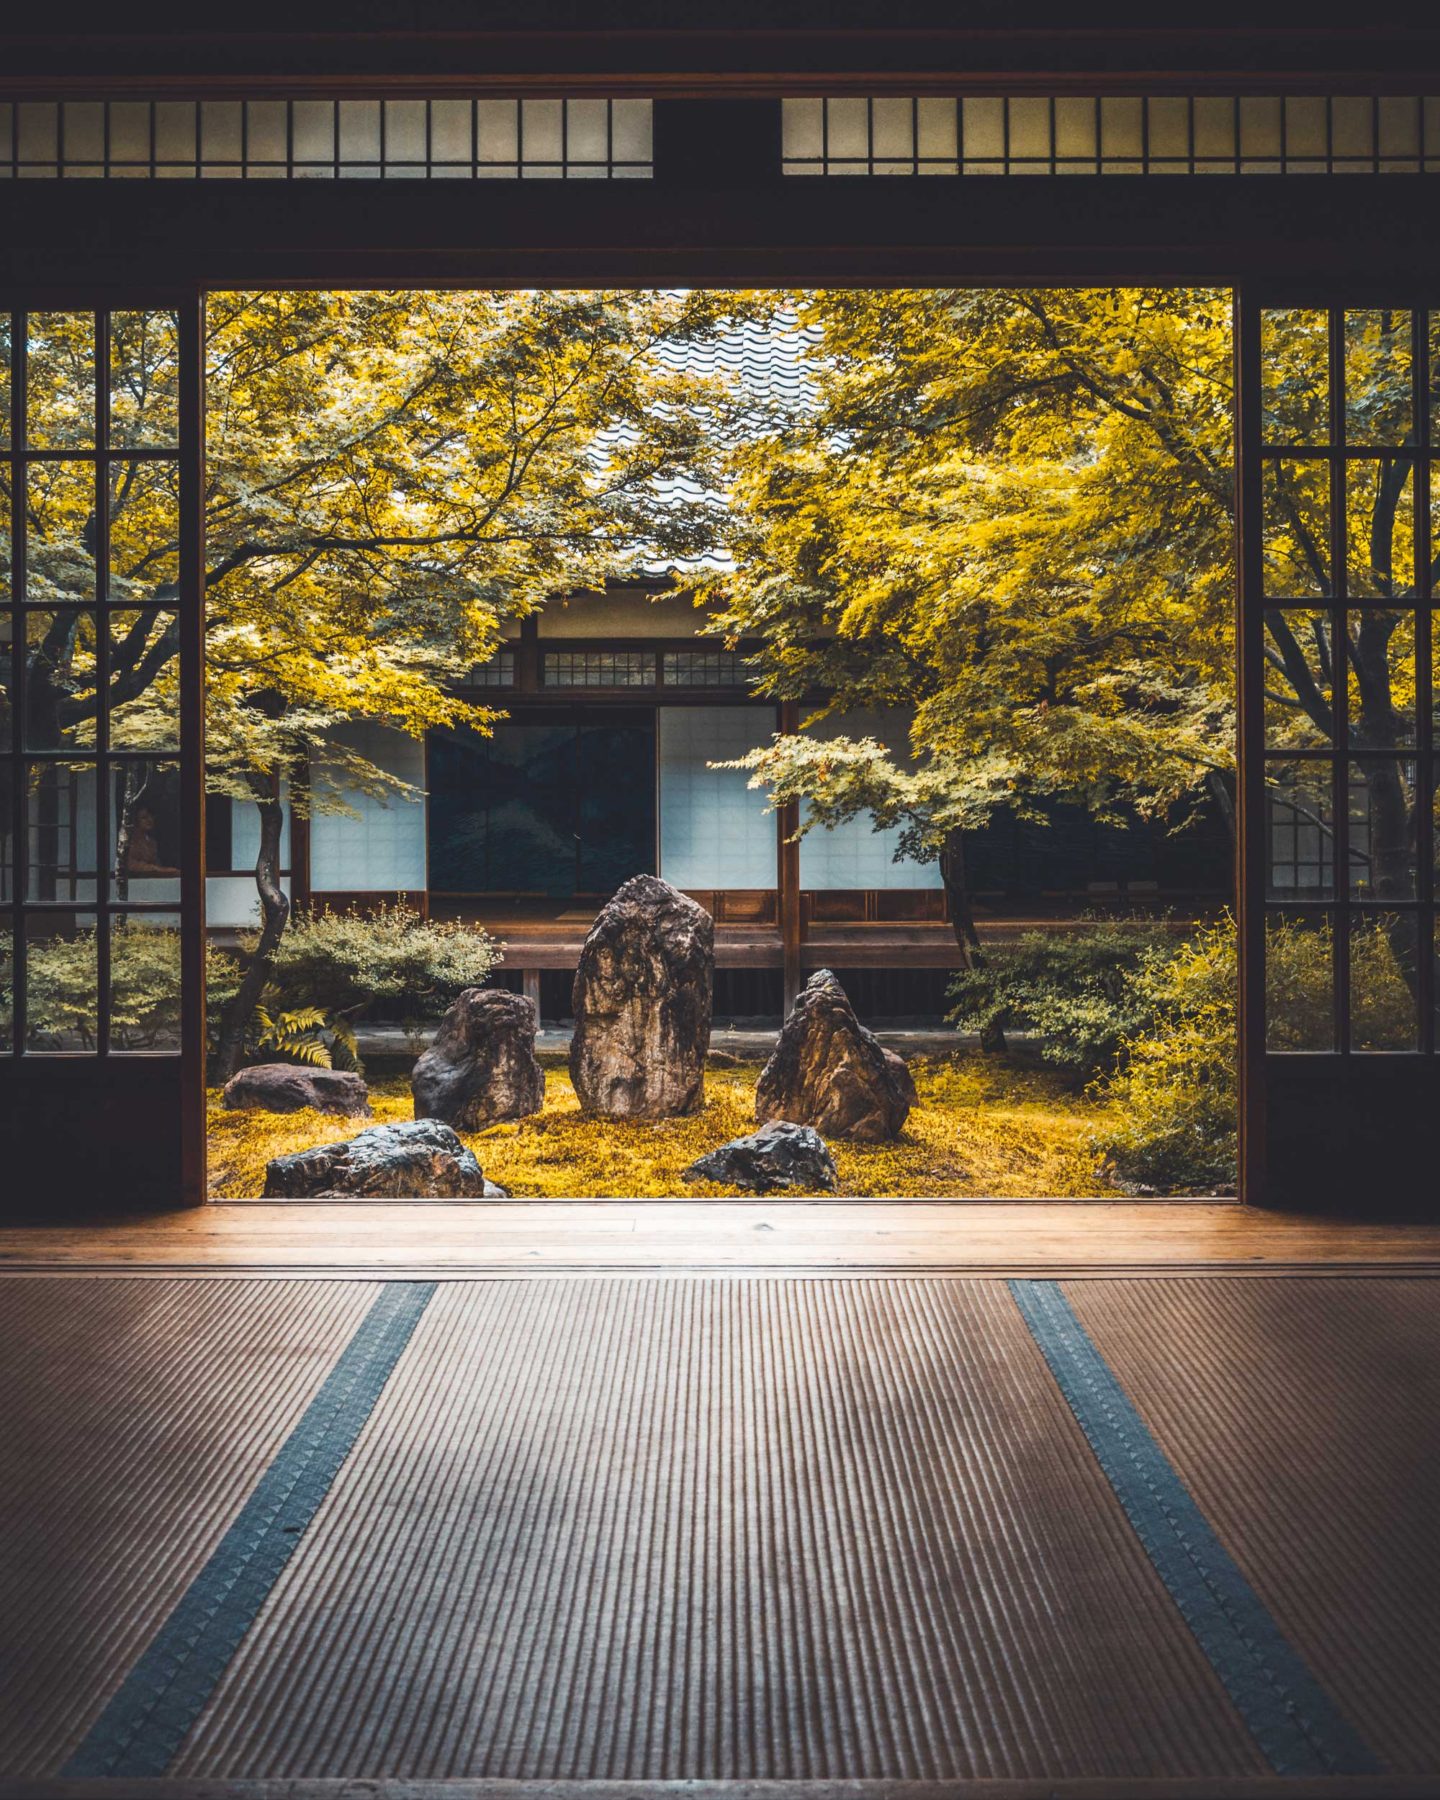 Looking out through open lattice doors to a calm and peaceful Japanese garden from a room lined with mats, Osaka